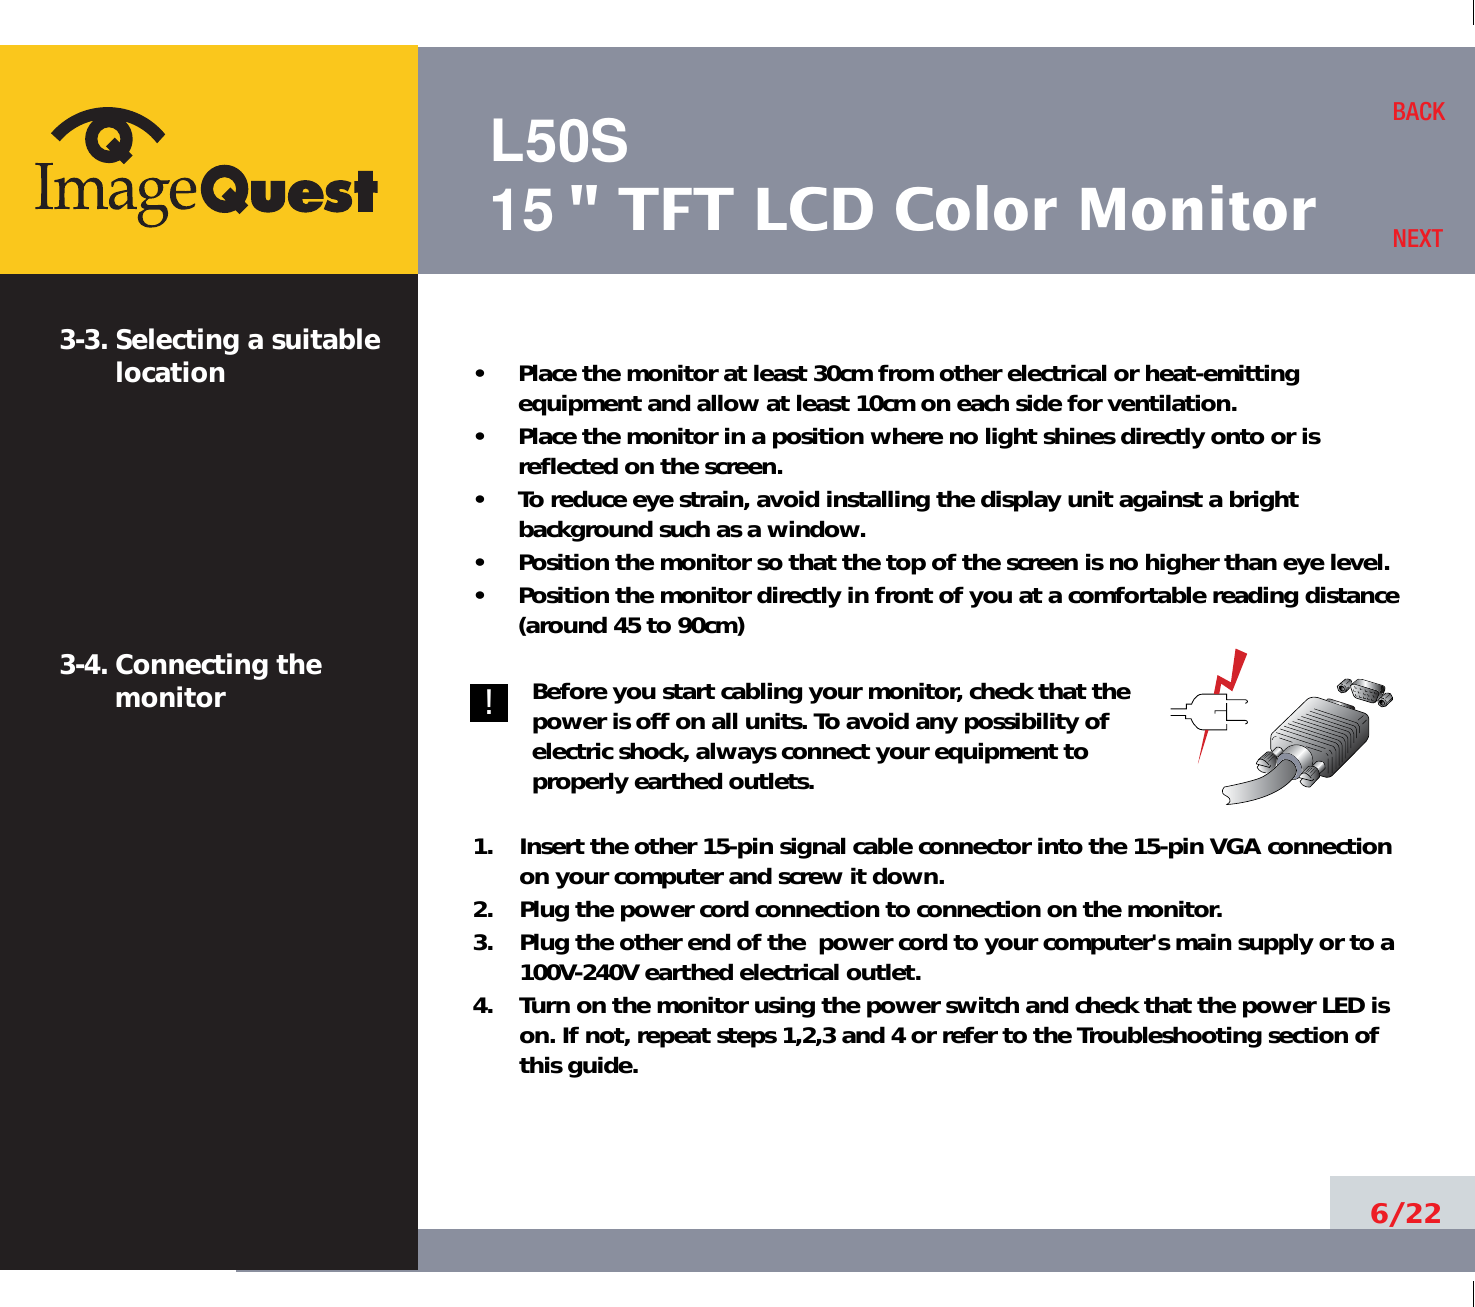 L50S15&quot; TFT LCD Color Monitor6/22BACKNEXT3-3. Selecting a suitablelocation3-4. Connecting the monitor•     Place the monitor at least 30cm from other electrical or heat-emittingequipment and allow at least 10cm on each side for ventilation.•     Place the monitor in a position where no light shines directly onto or isreflected on the screen.•     To reduce eye strain, avoid installing the display unit against a brightbackground such as a window.•     Position the monitor so that the top of the screen is no higher than eye level.•     Position the monitor directly in front of you at a comfortable reading distance(around 45 to 90cm) Before you start cabling your monitor, check that thepower is off on all units. To avoid any possibility ofelectric shock, always connect your equipment toproperly earthed outlets.1.    Insert the other 15-pin signal cable connector into the 15-pin VGA connectionon your computer and screw it down. 2.    Plug the power cord connection to connection on the monitor.3.    Plug the other end of the  power cord to your computer&apos;s main supply or to a100V-240V earthed electrical outlet.4.    Turn on the monitor using the power switch and check that the power LED ison. If not, repeat steps 1,2,3 and 4 or refer to the Troubleshooting section ofthis guide.!!